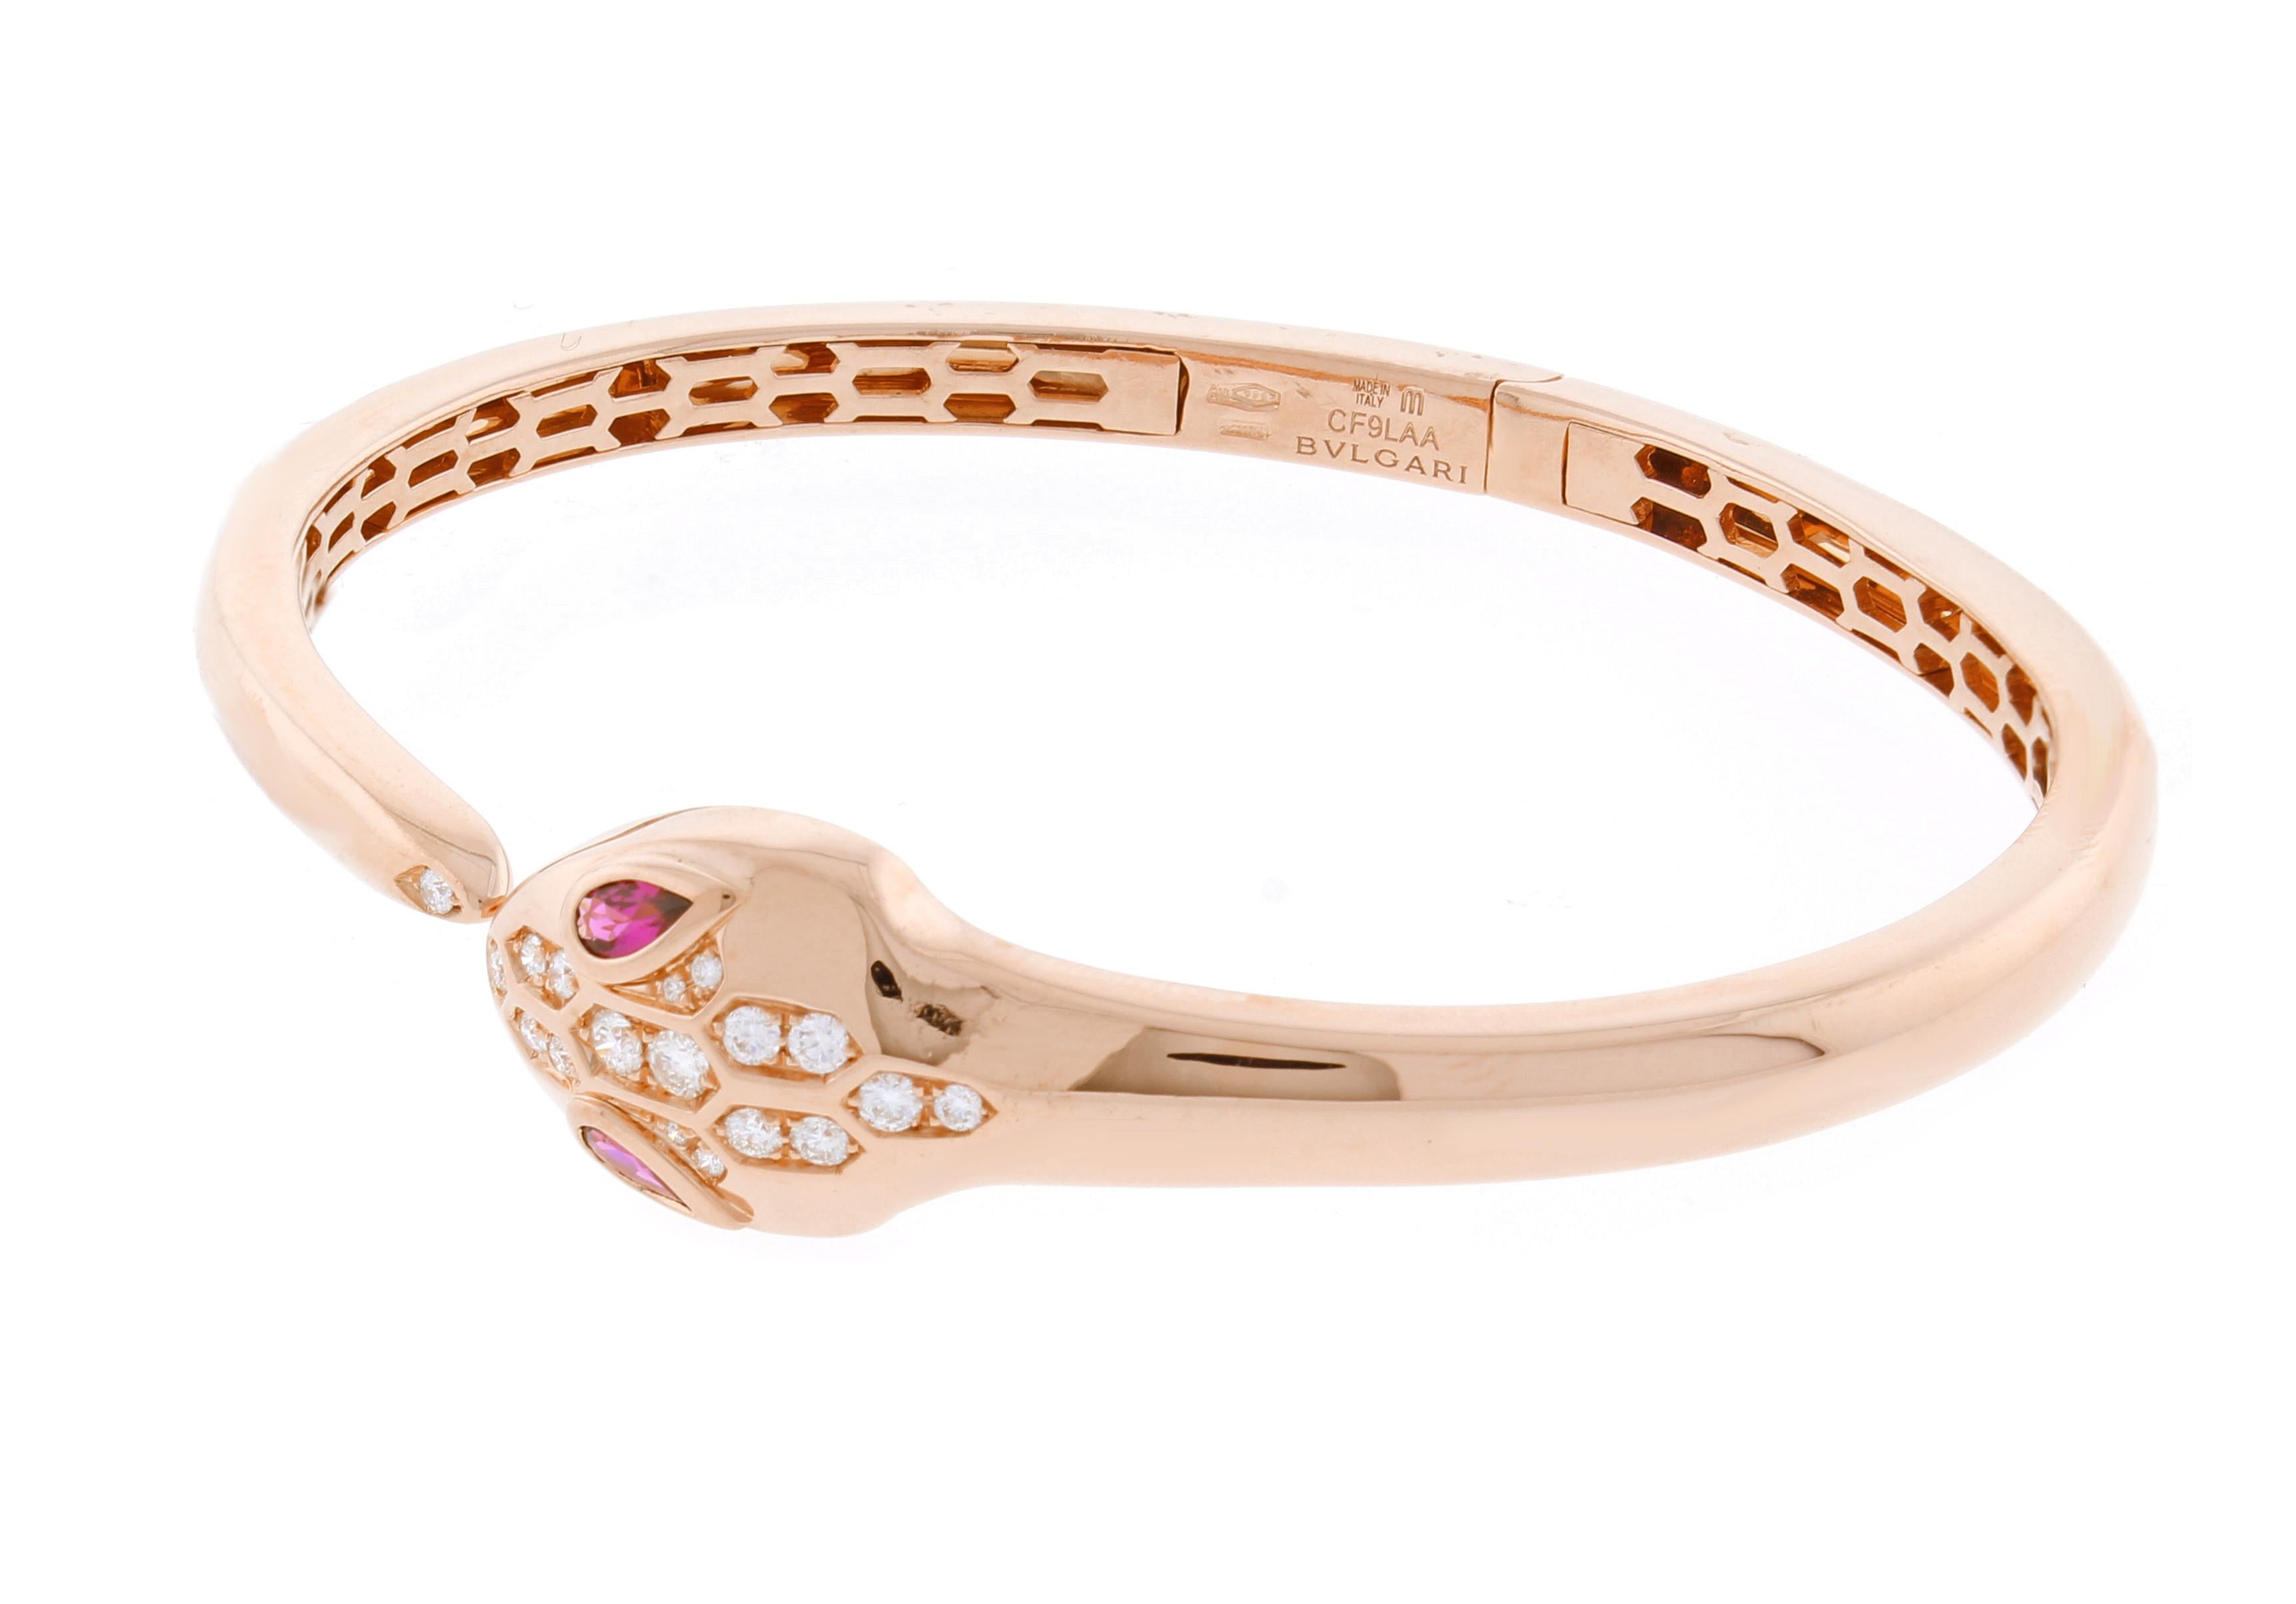 From Bulgari's Serpenti collection thier snake bracelet in 18 karat rose gold, set with rubellite eyes and demi pavé diamonds on the head and the tail.
♦ Designer:  Bulgari
♦ Metal:  18 karat rose gold
♦ Gem stone: 18 Diamonds=.45 carats
♦ Gem